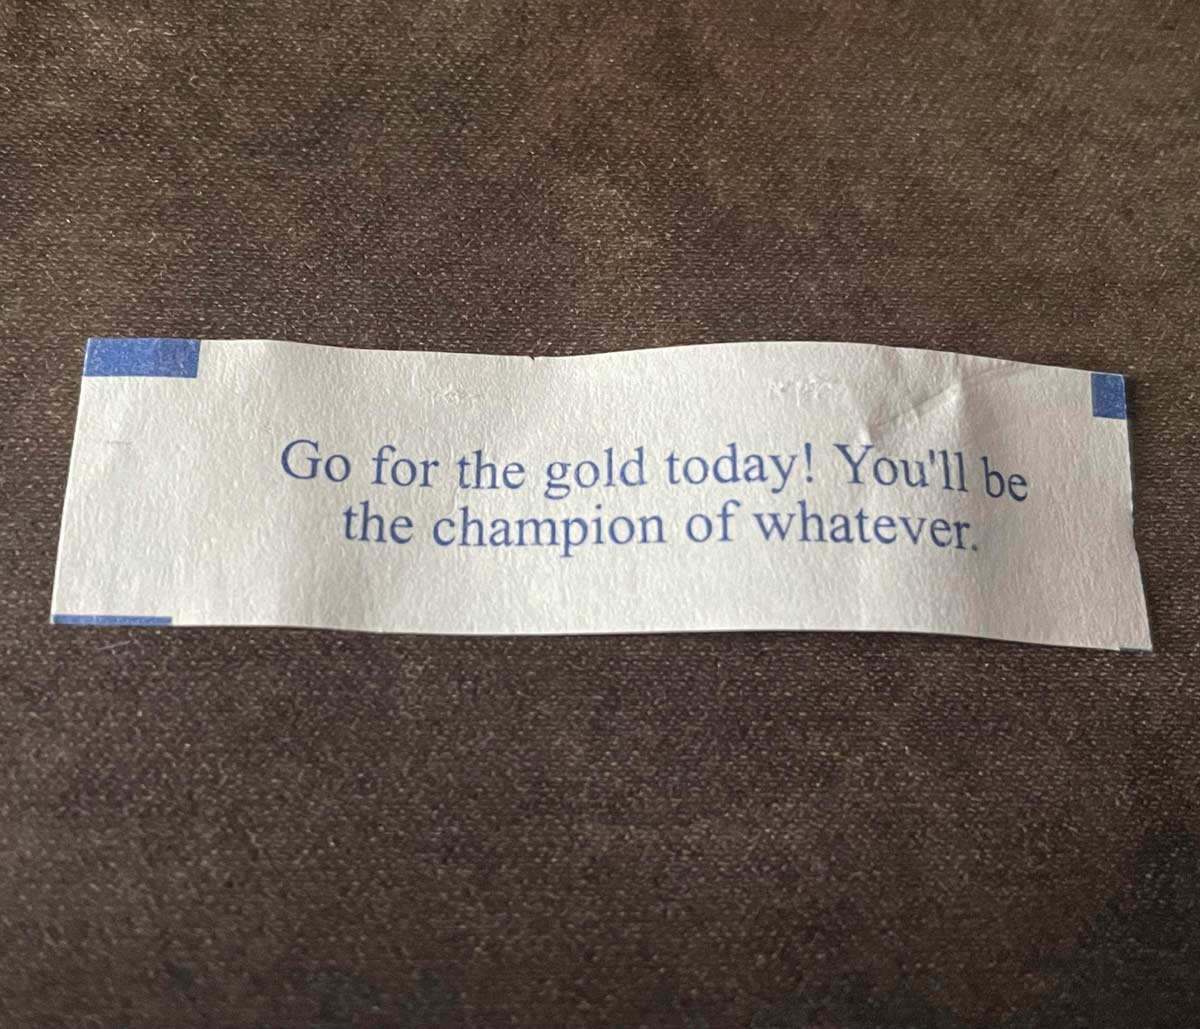 My fortune cookie today